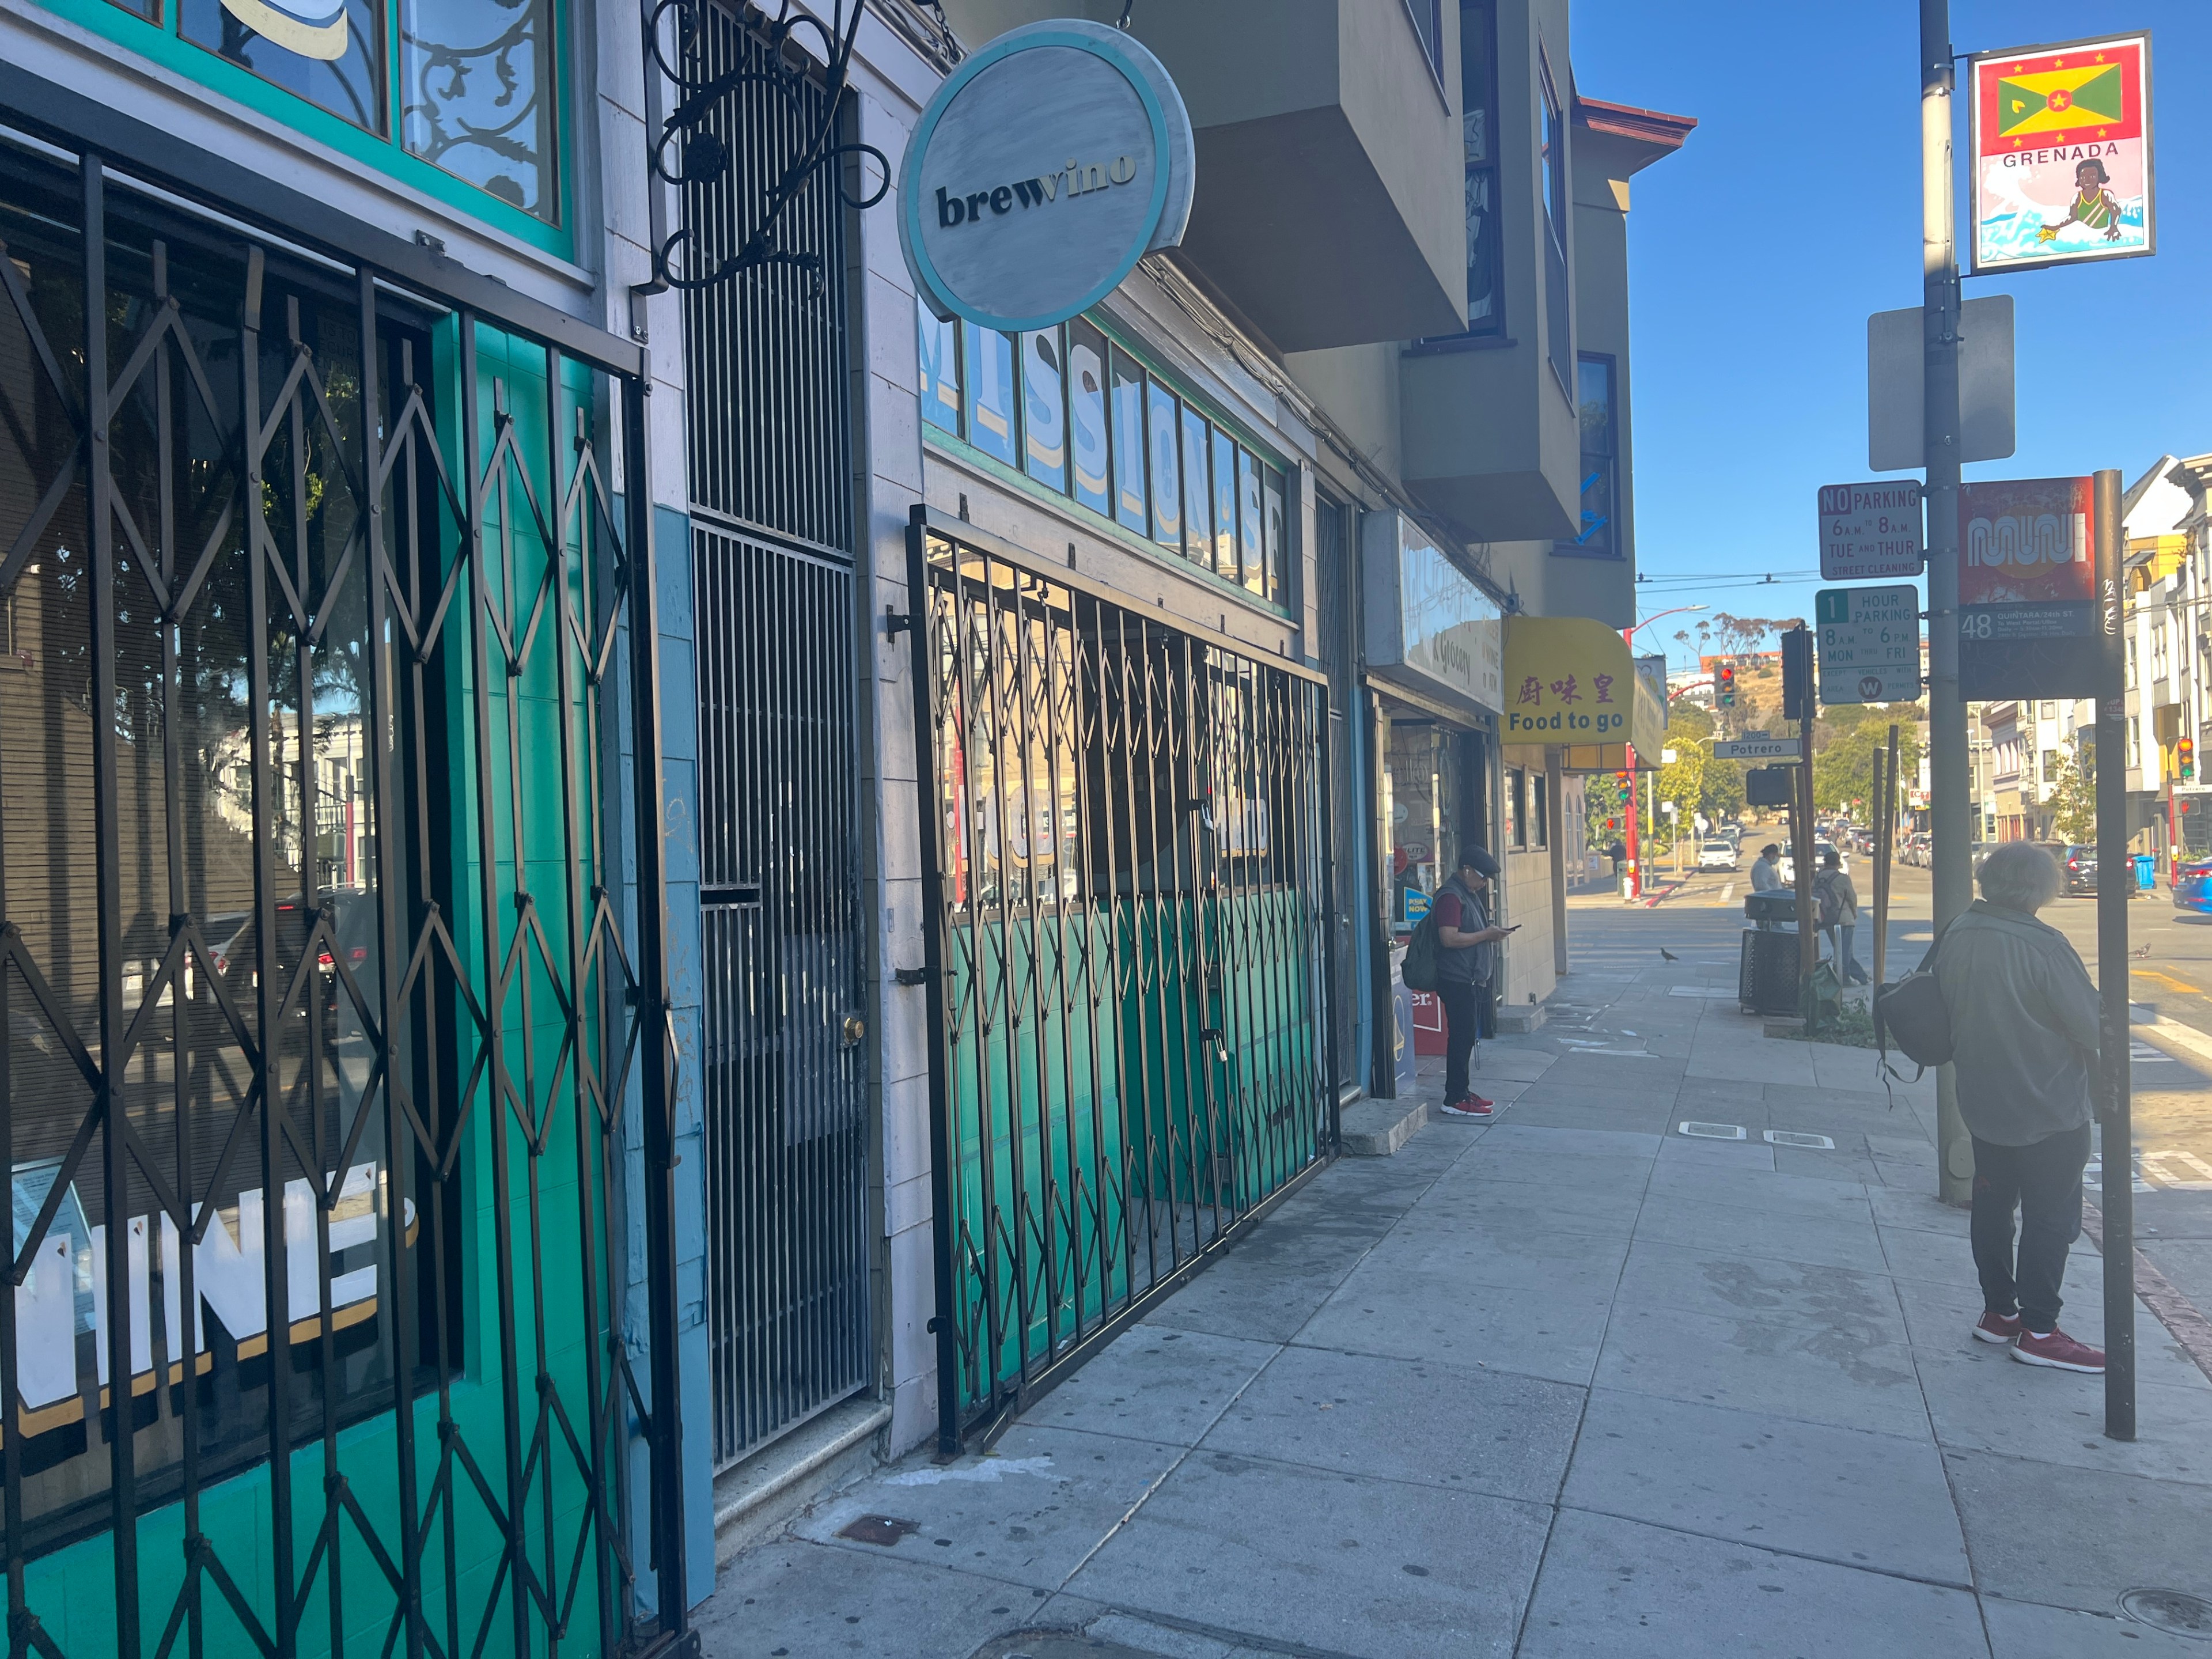 A shuttered storefront on 24th Street in San Francisco's Mission district.